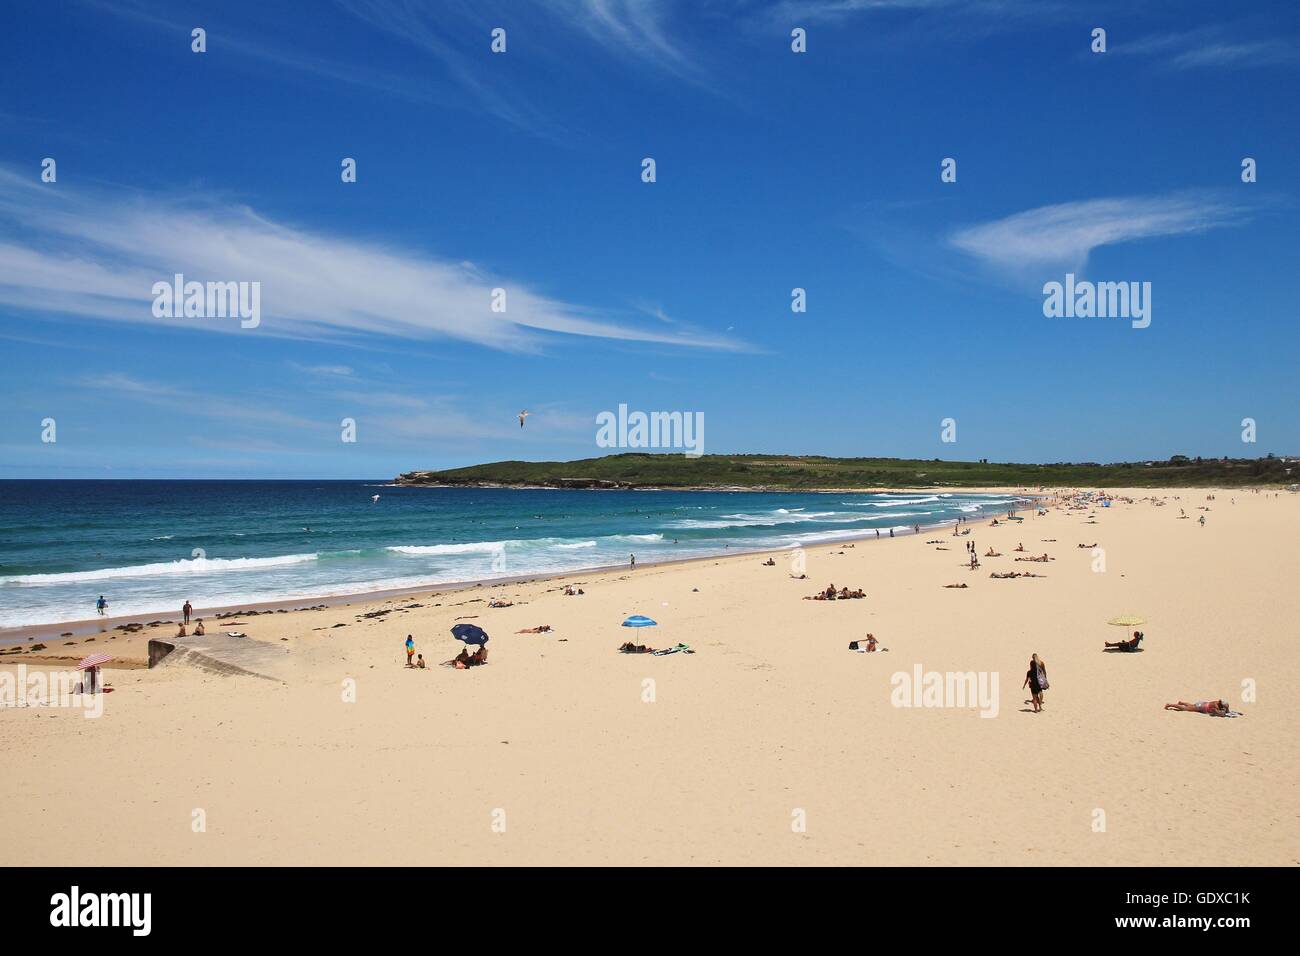 Maroubra Beach and turquoise Pacific. Summer scene in Sydney. Stock Photo